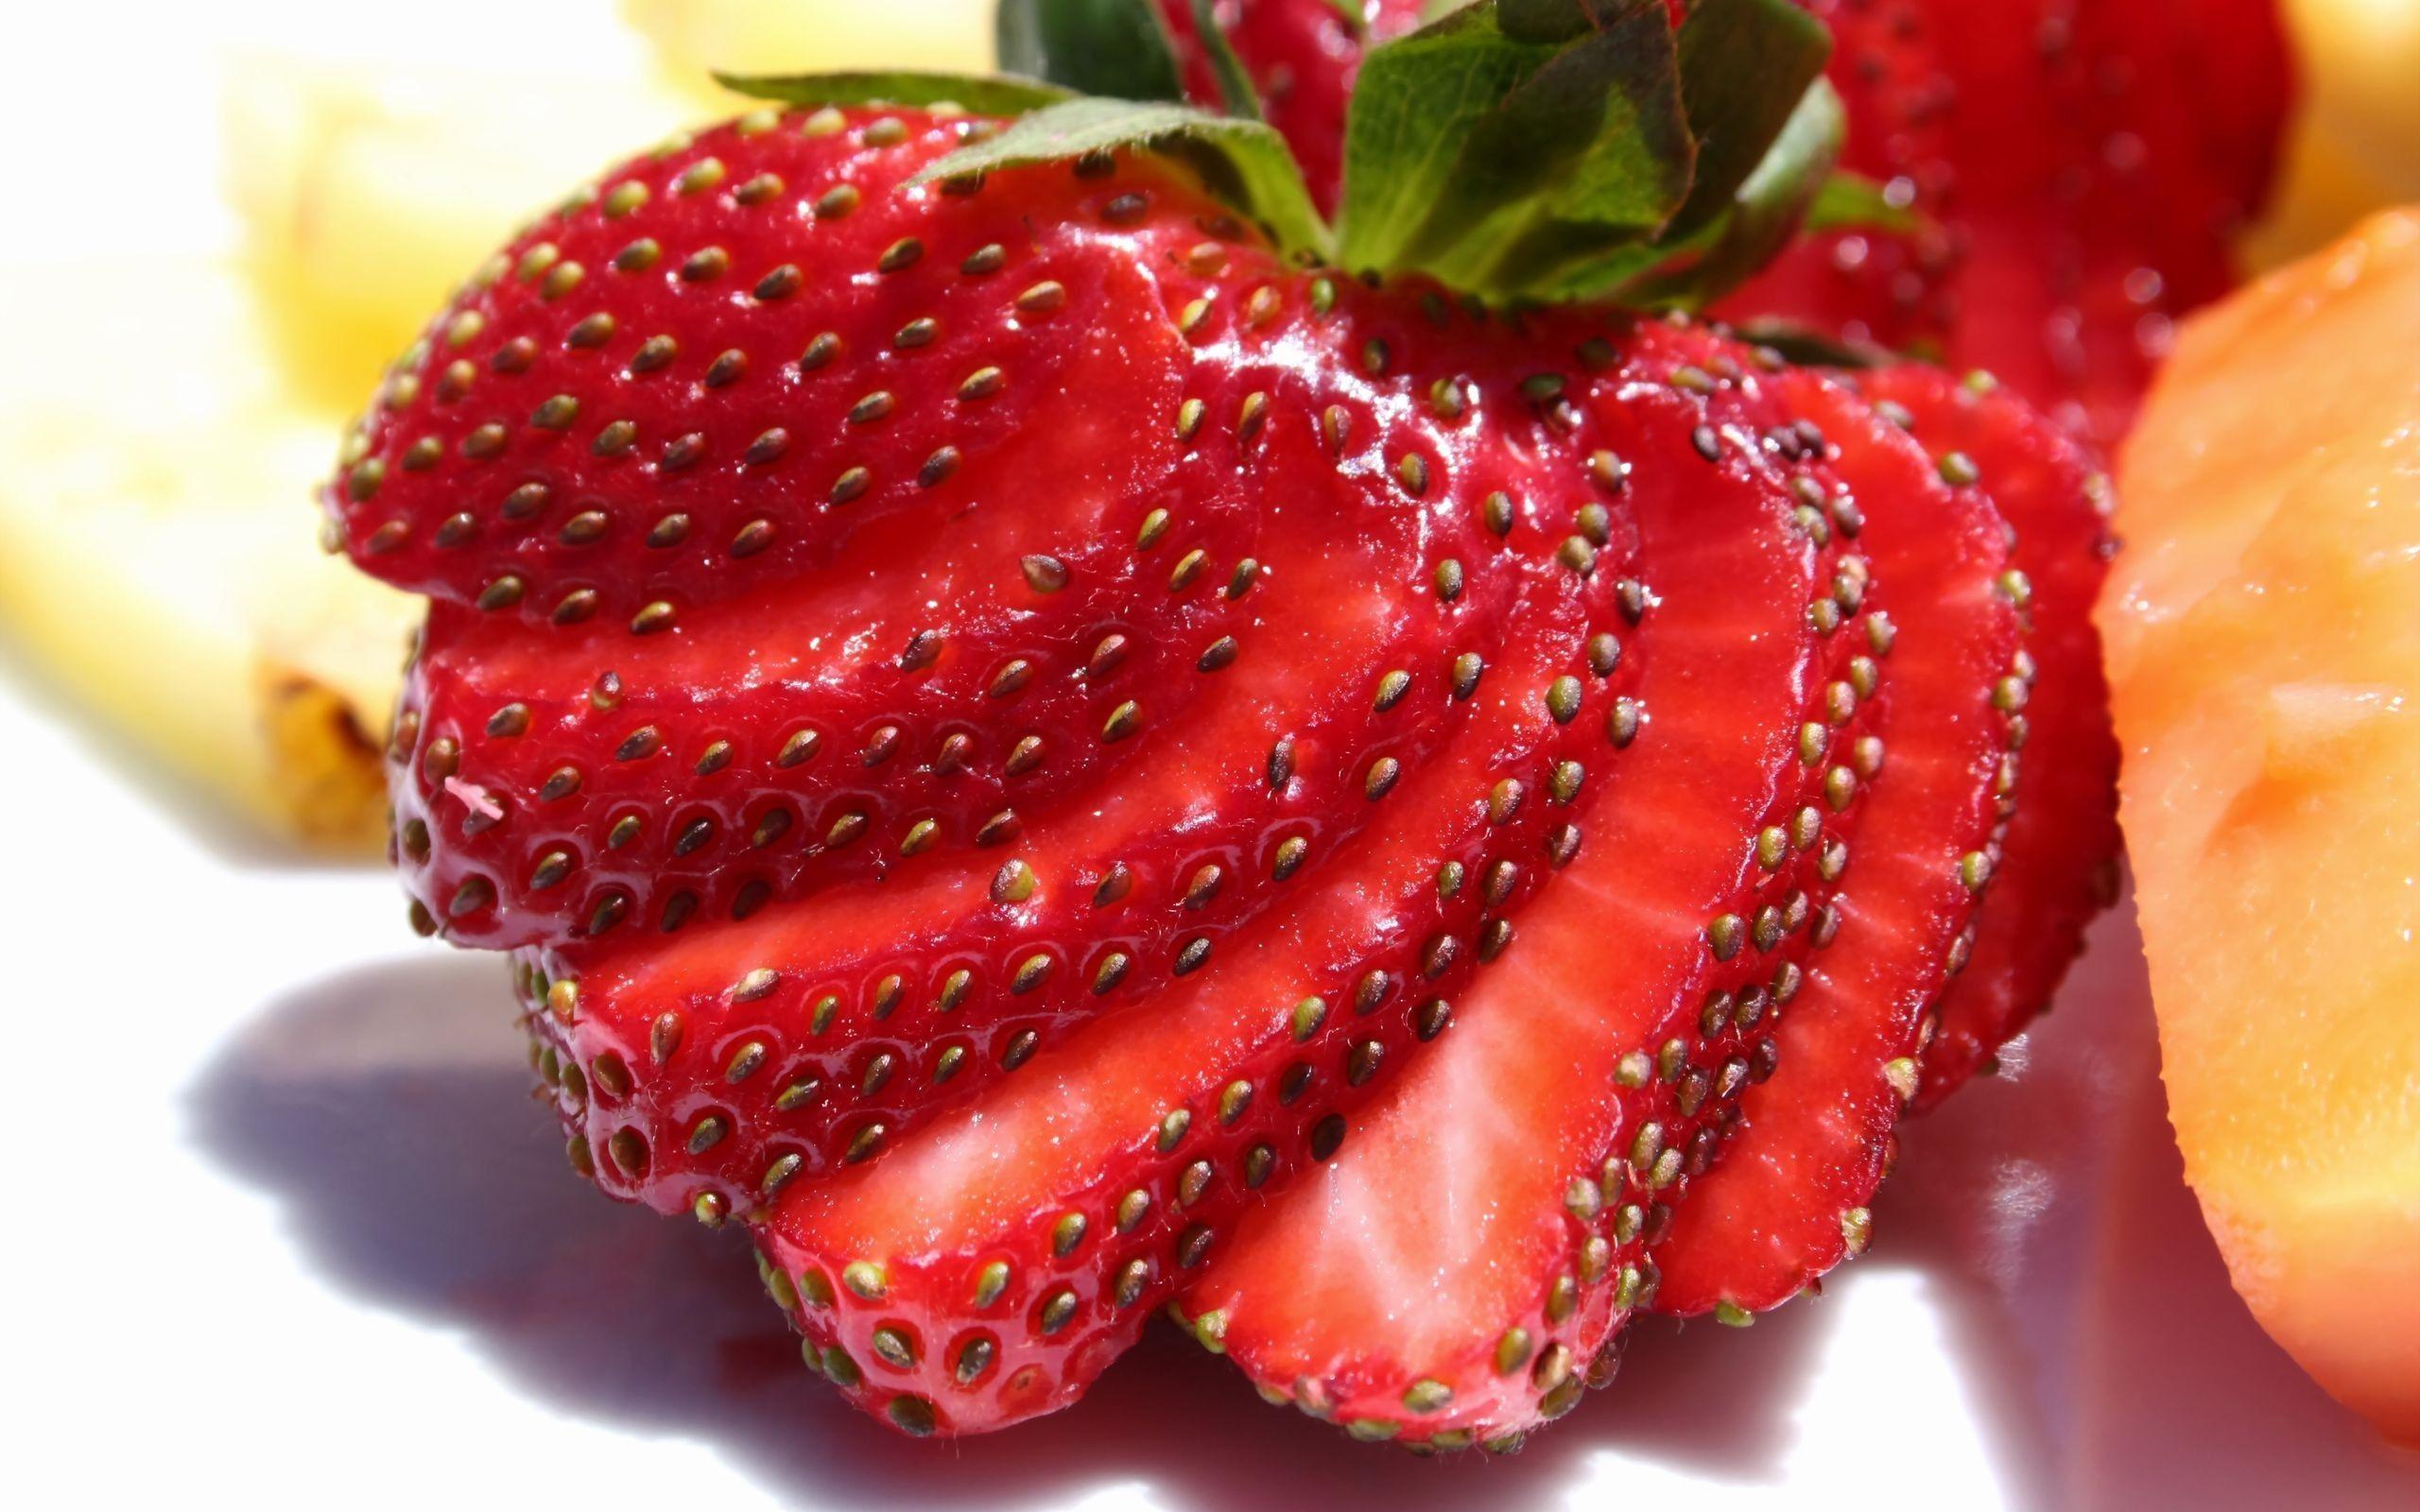 Strawberry Fruits Wallpaper, Adorable 46 Strawberry Fruits